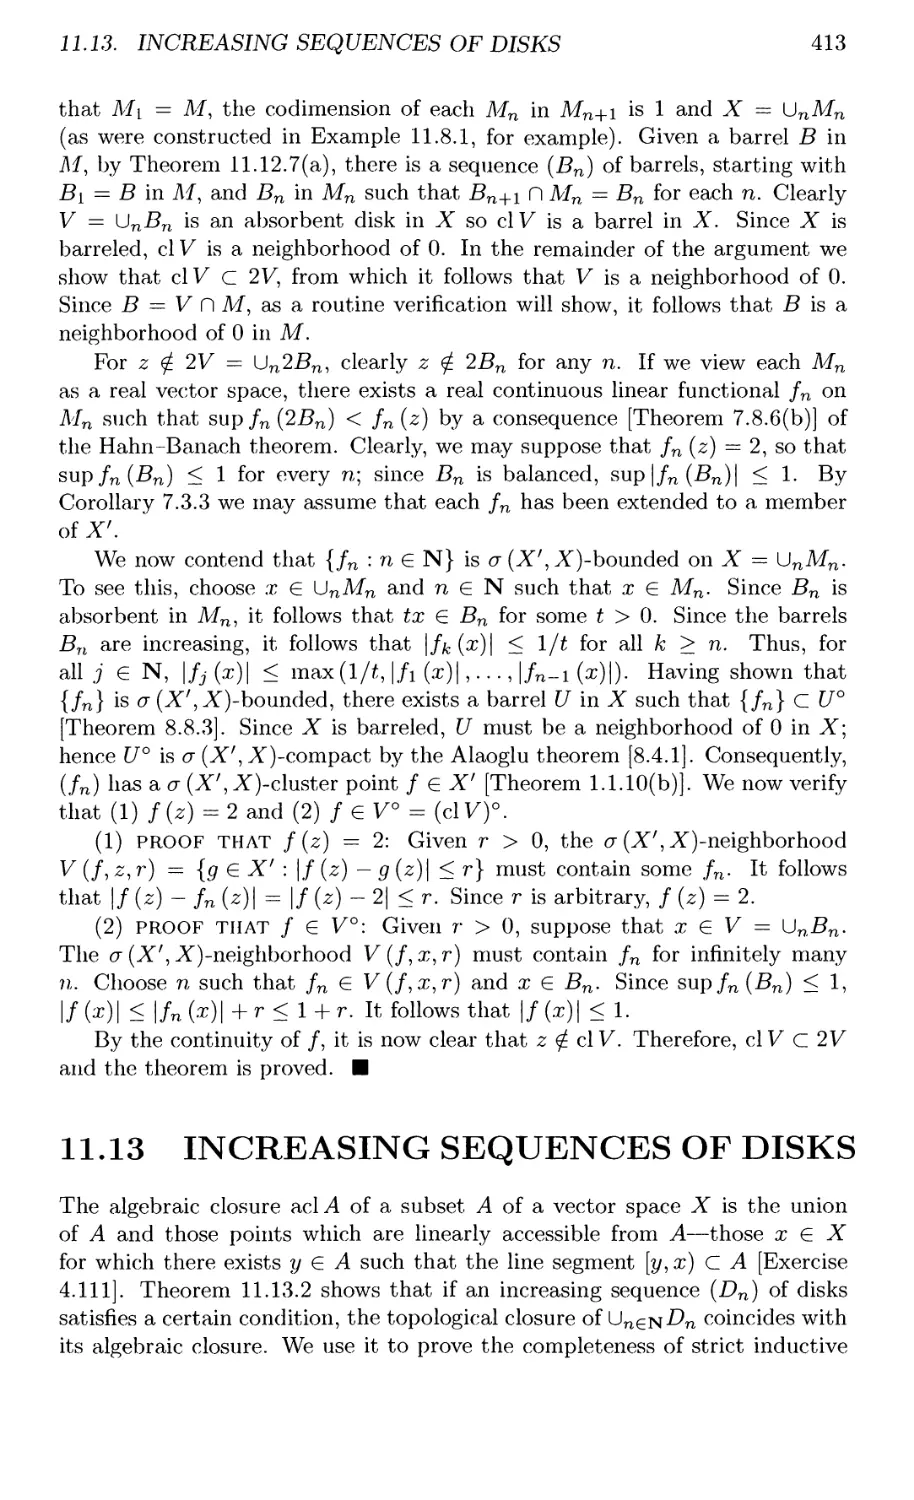 11.13 INCREASING SEQUENCES OF DISKS